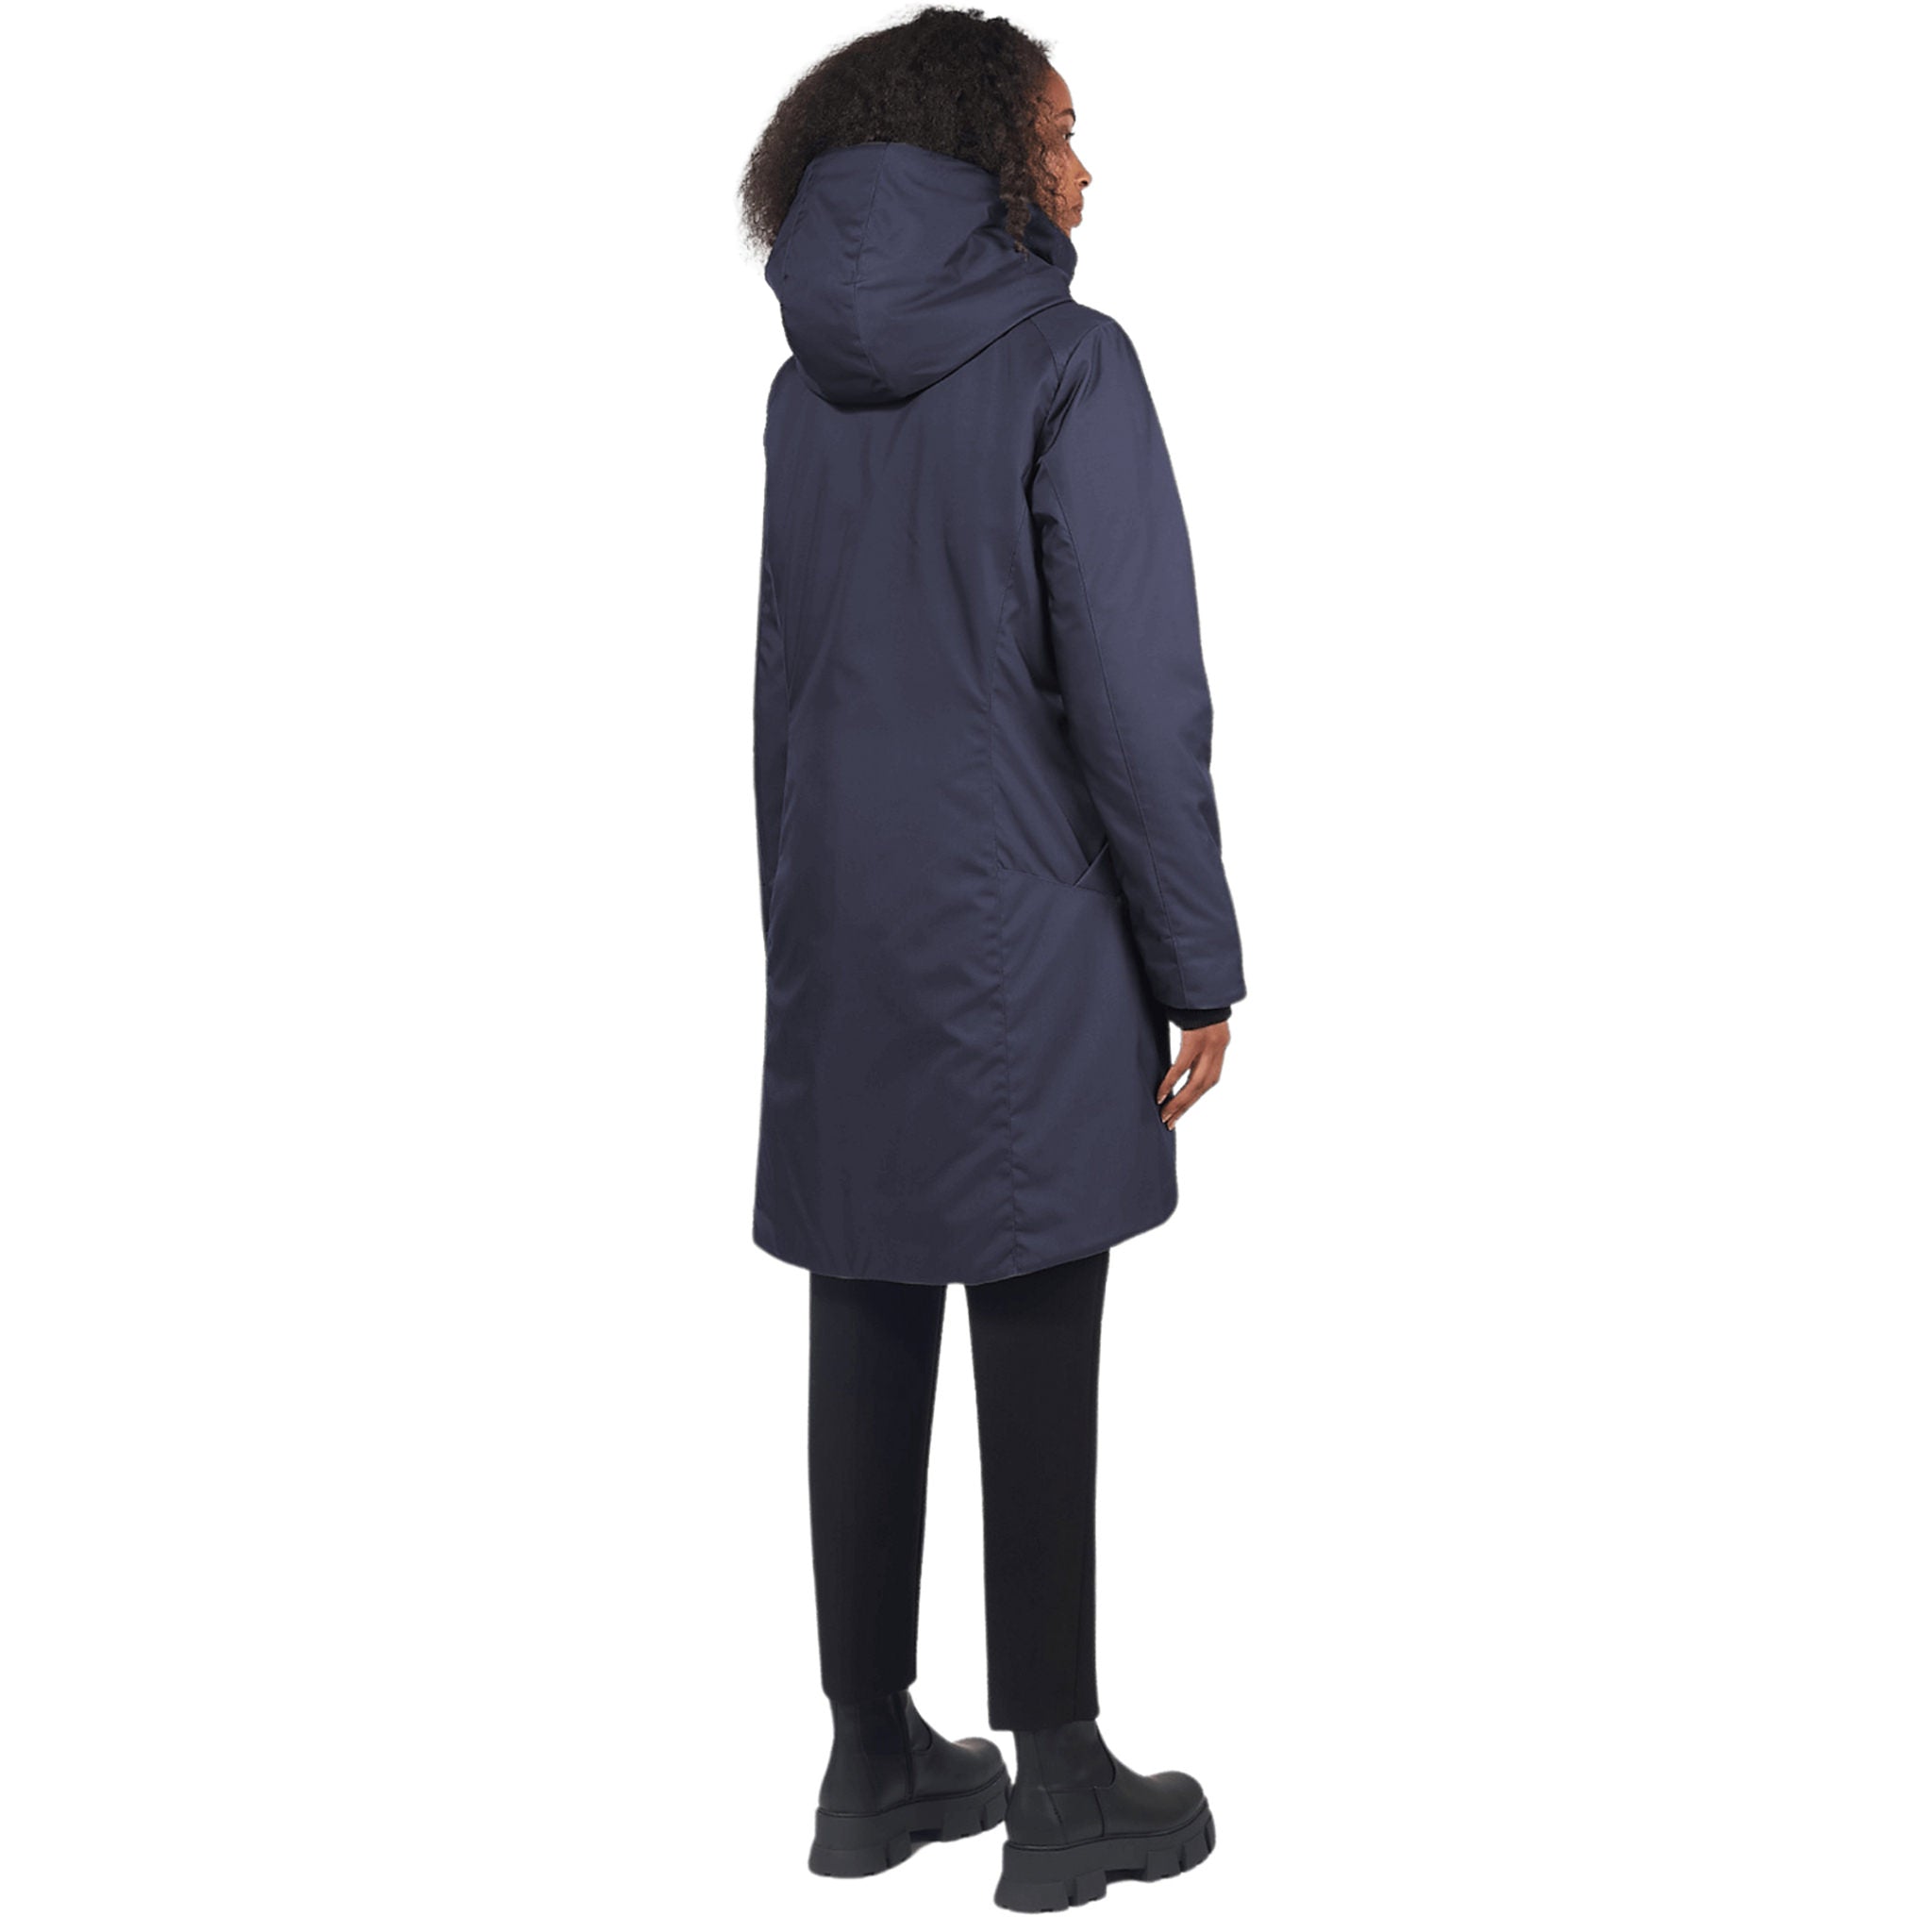 Back view of a female model wearing a navy, knee-length coat with a high neck